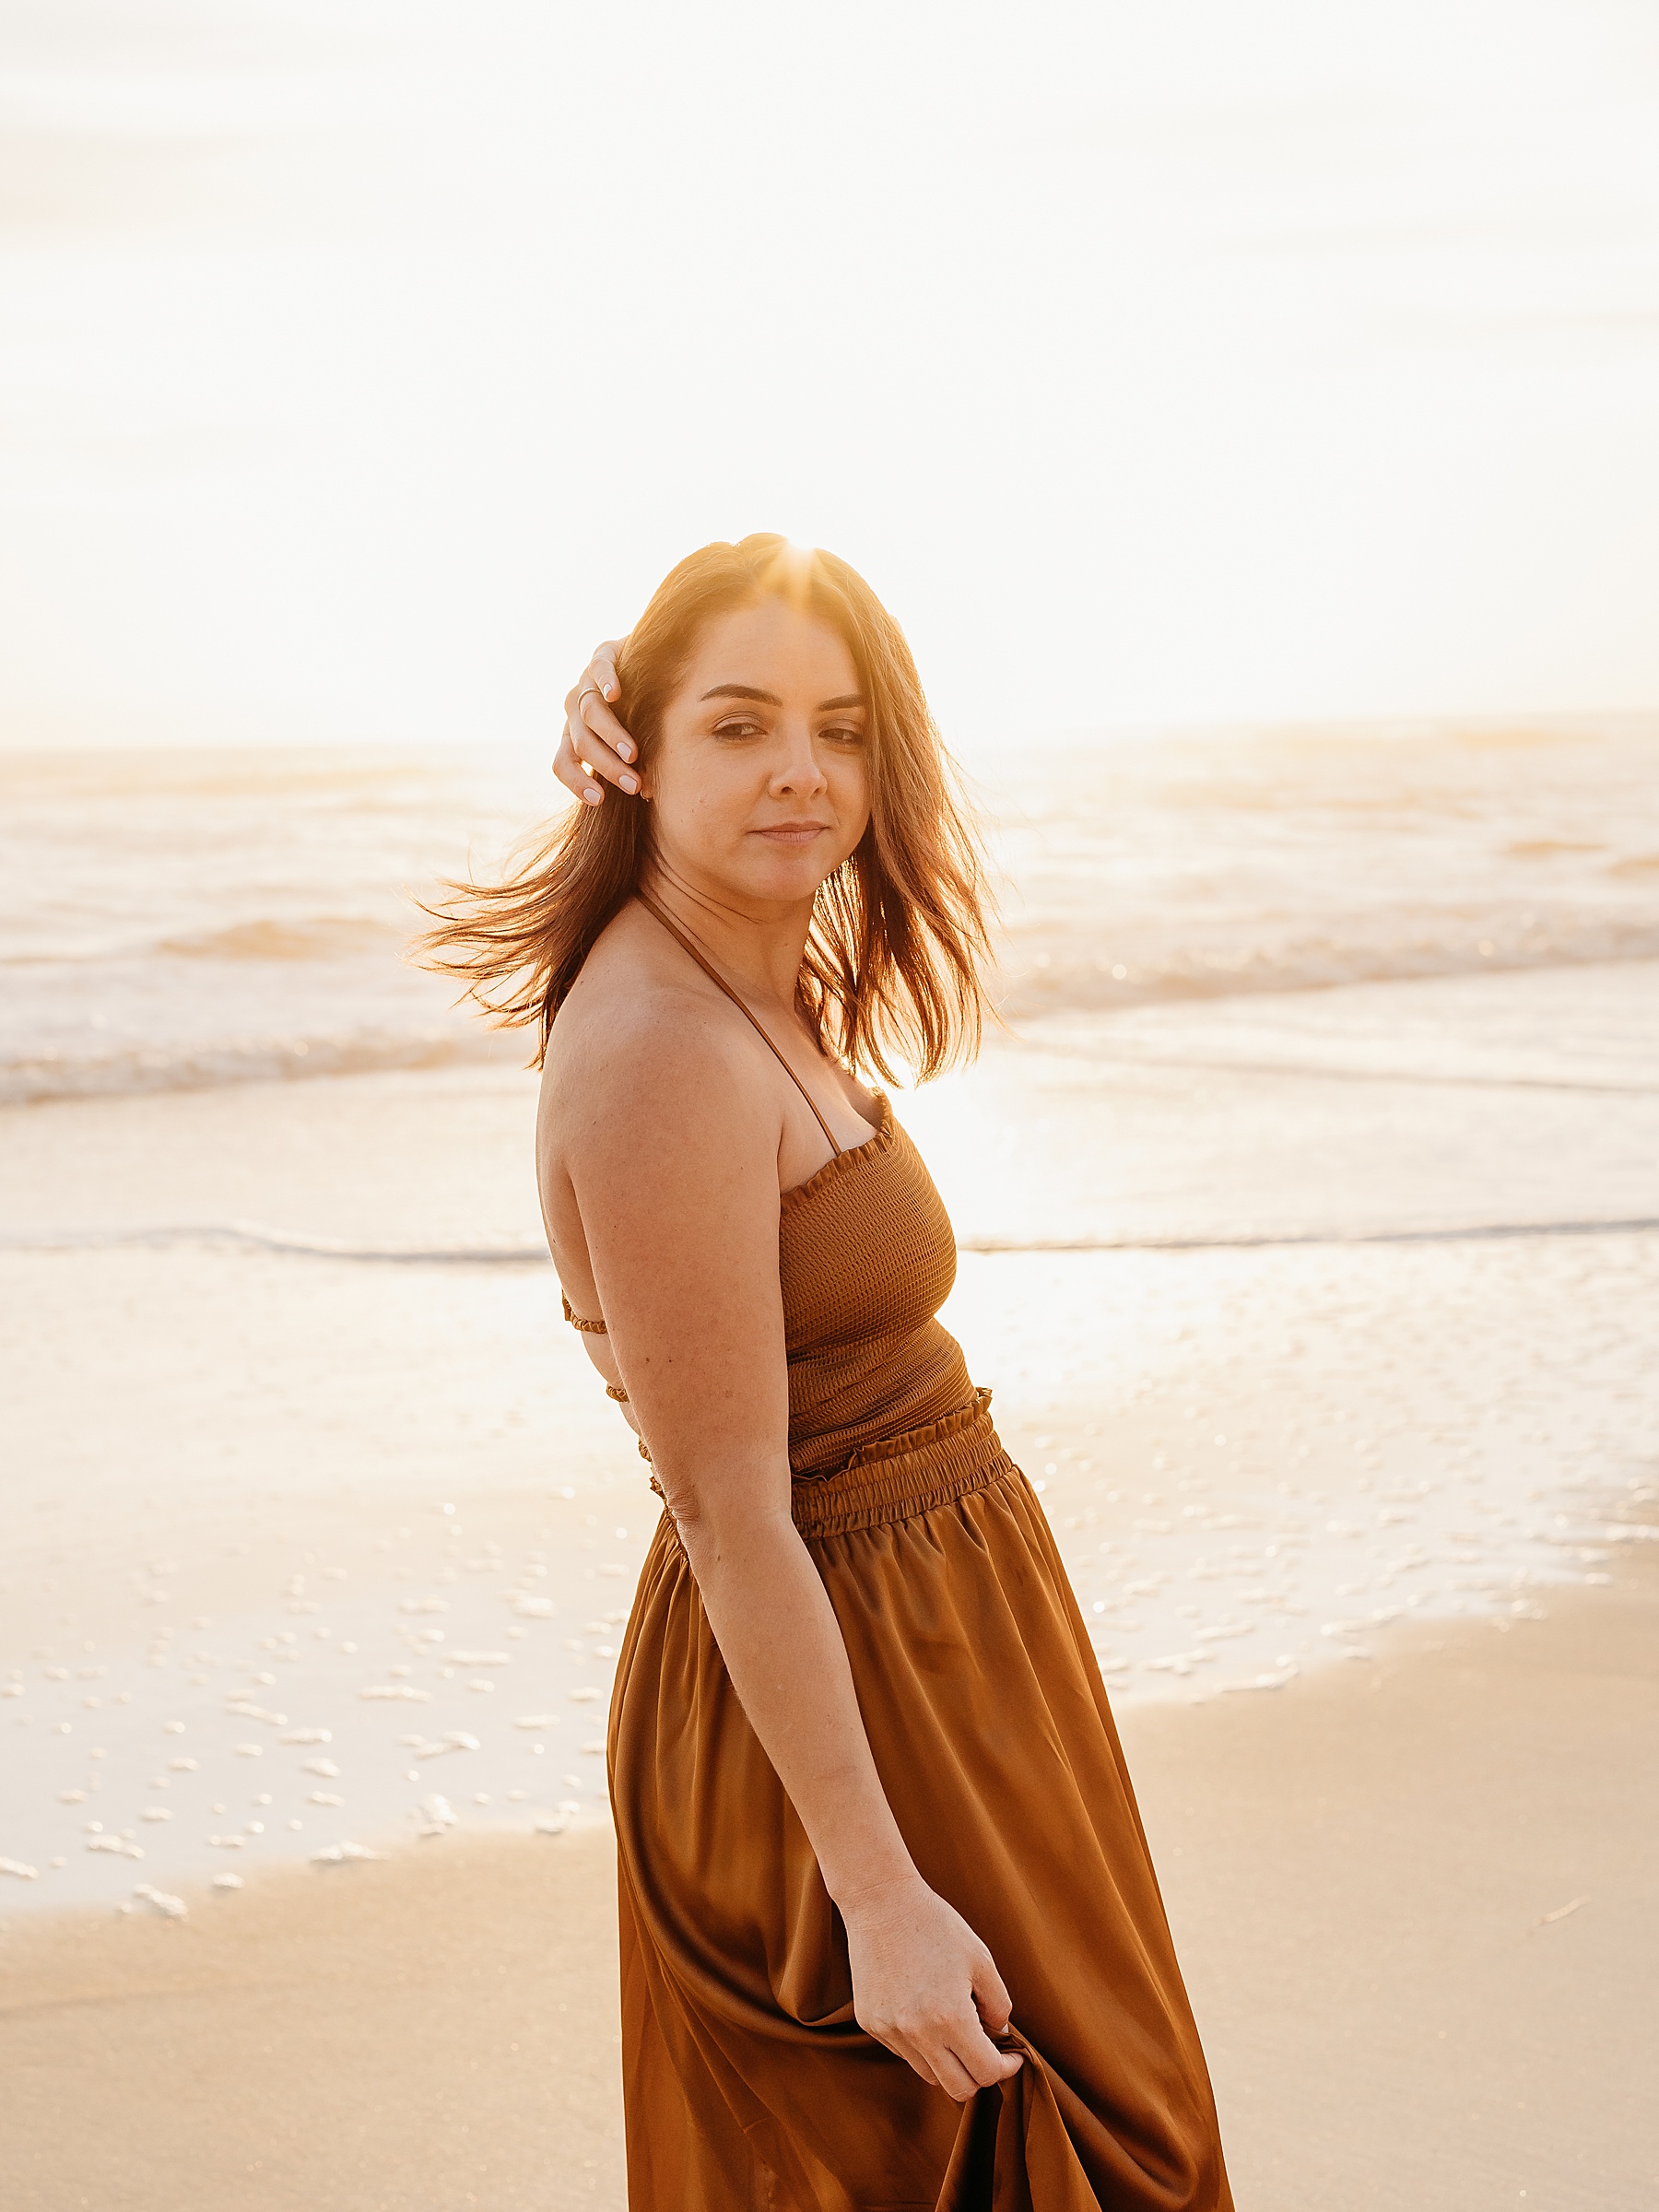 woman wearing rust colored dress on the beach at sunrise holding her hair